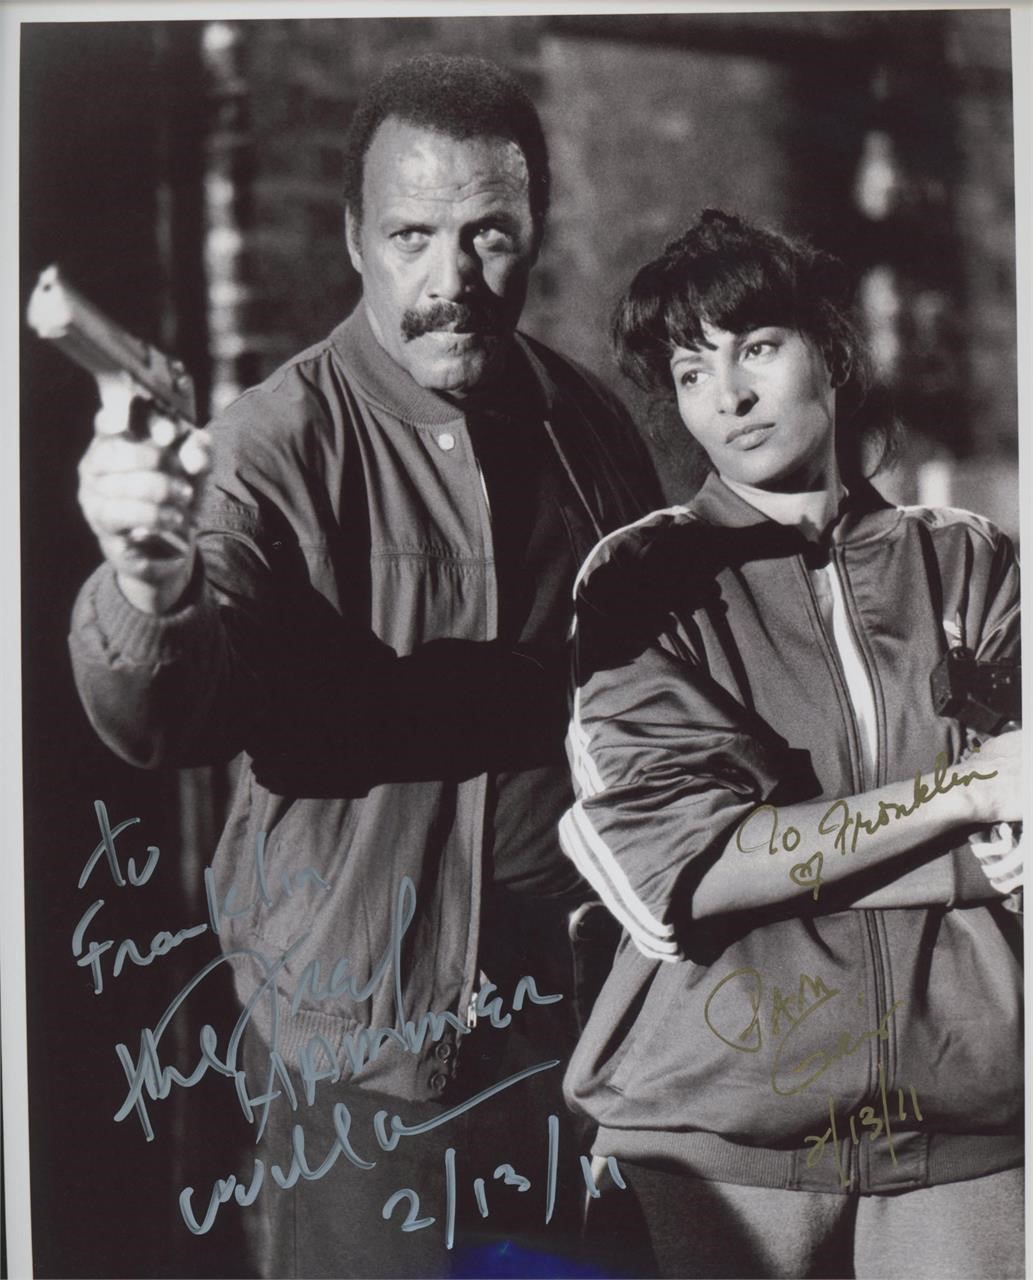 Fred "The Hammer" Williamson and Pam Grier signed